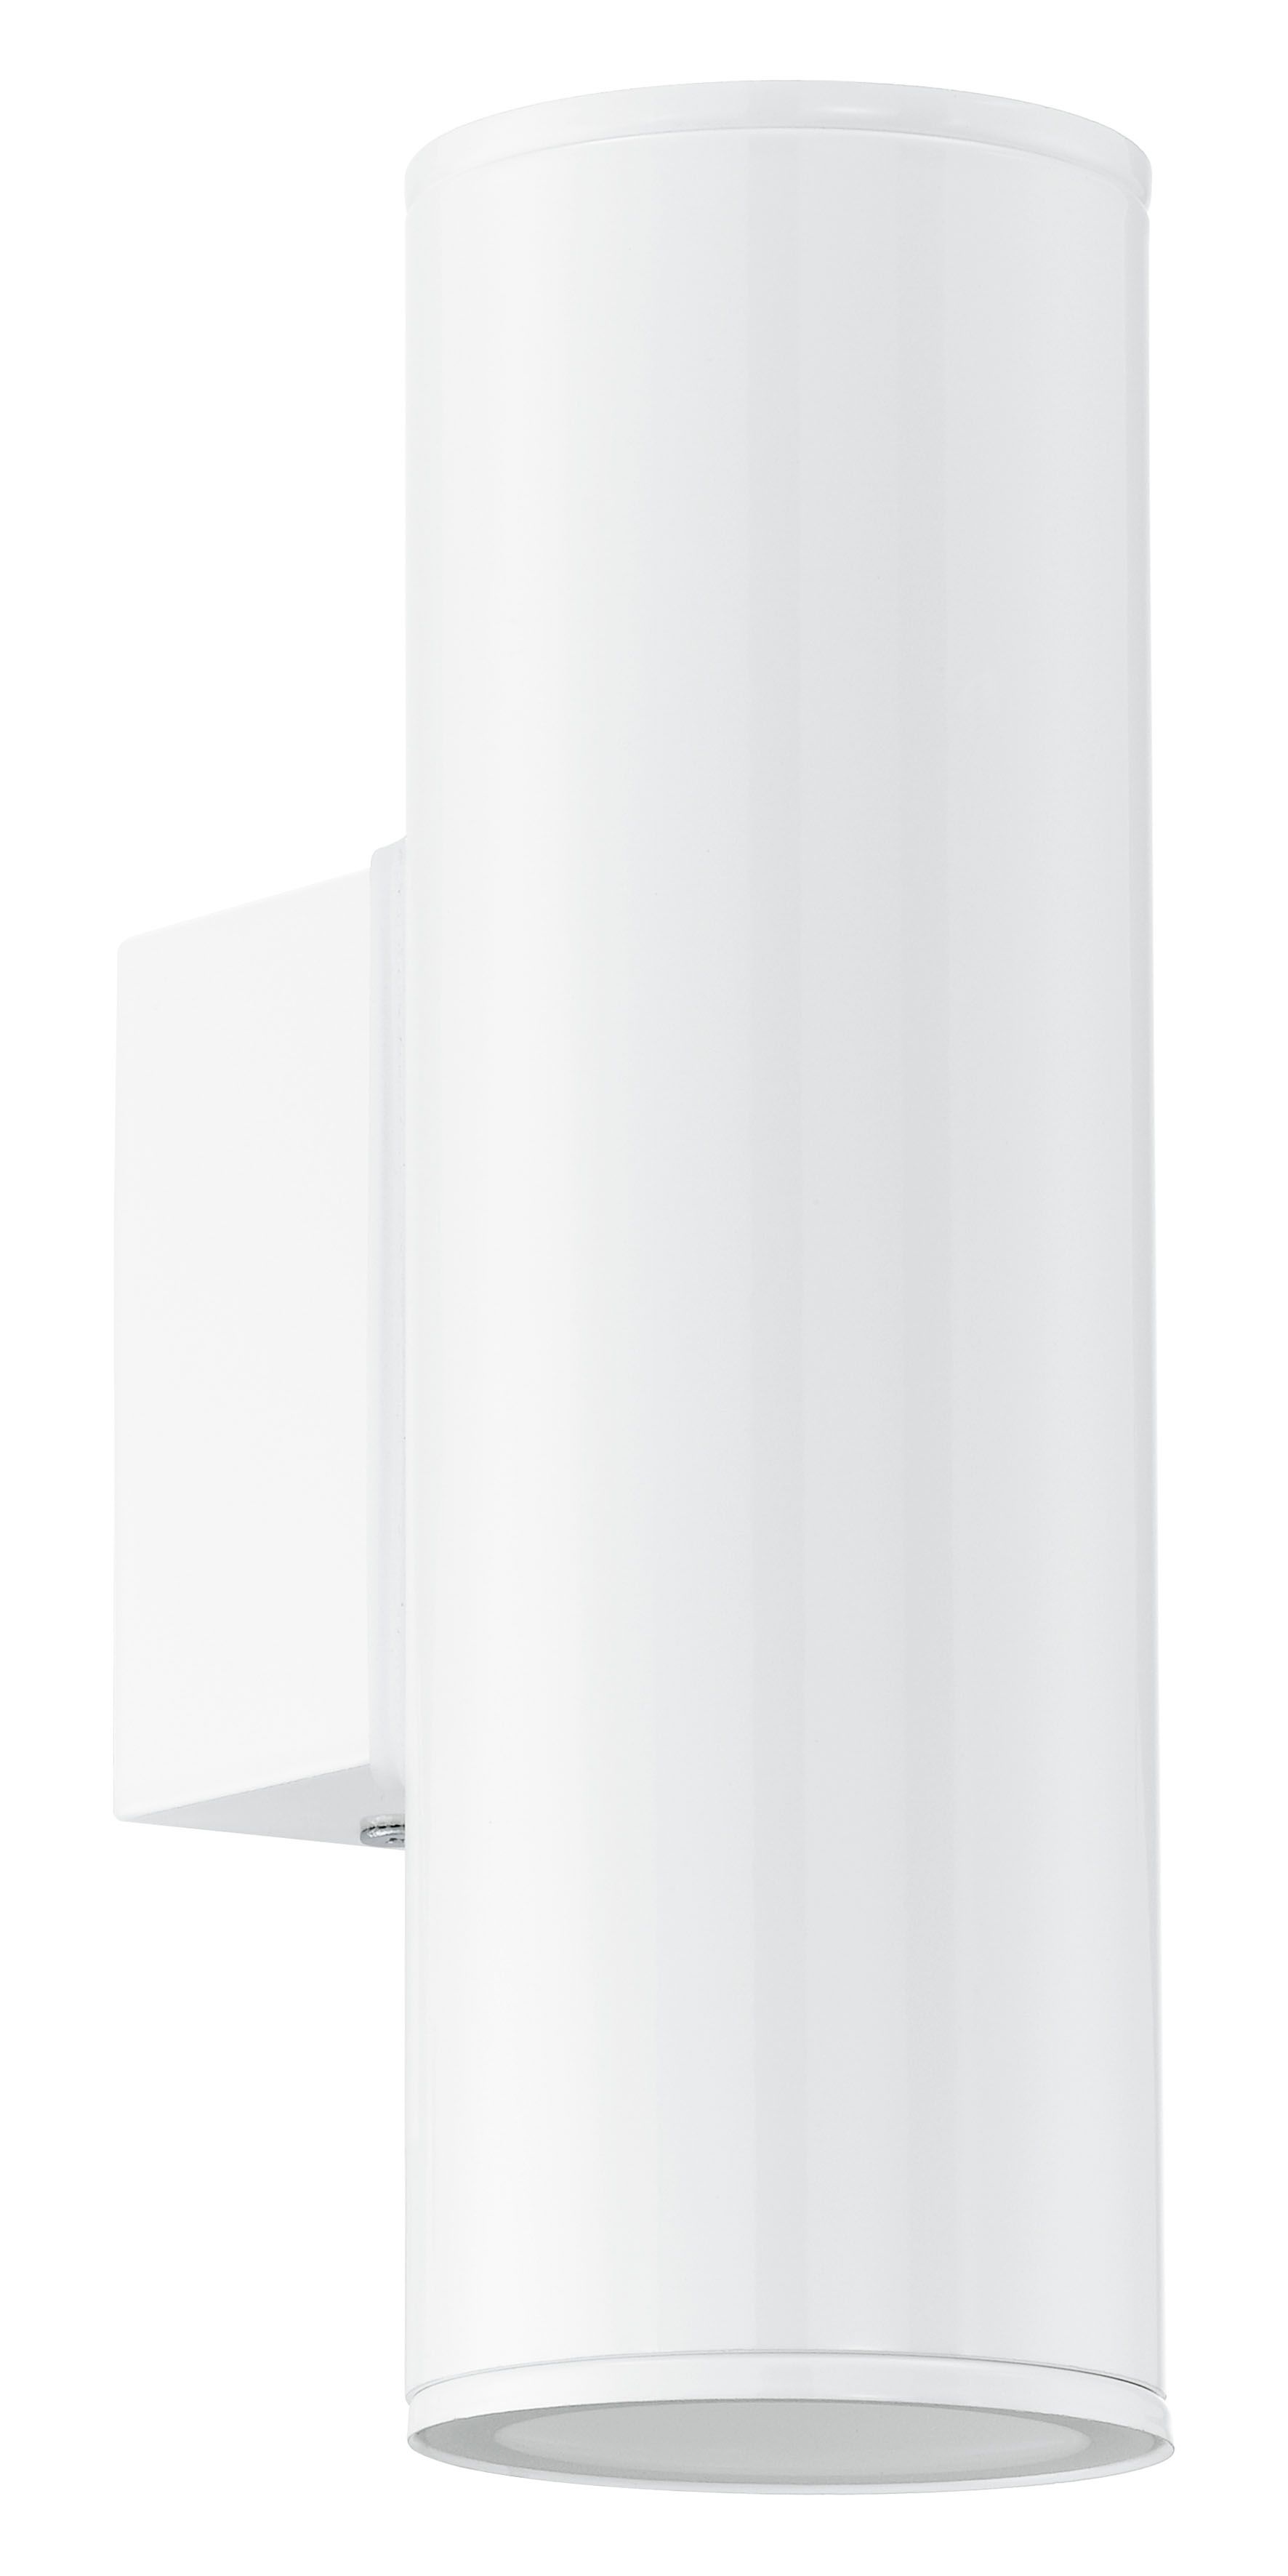 Lichtarena Lights And Bulbs | Eglo 94101 Wall Lamp Riga | Lichtarena Within 200mm Eglo Riga Outdoor Led Wall Lighting (Photo 5 of 15)